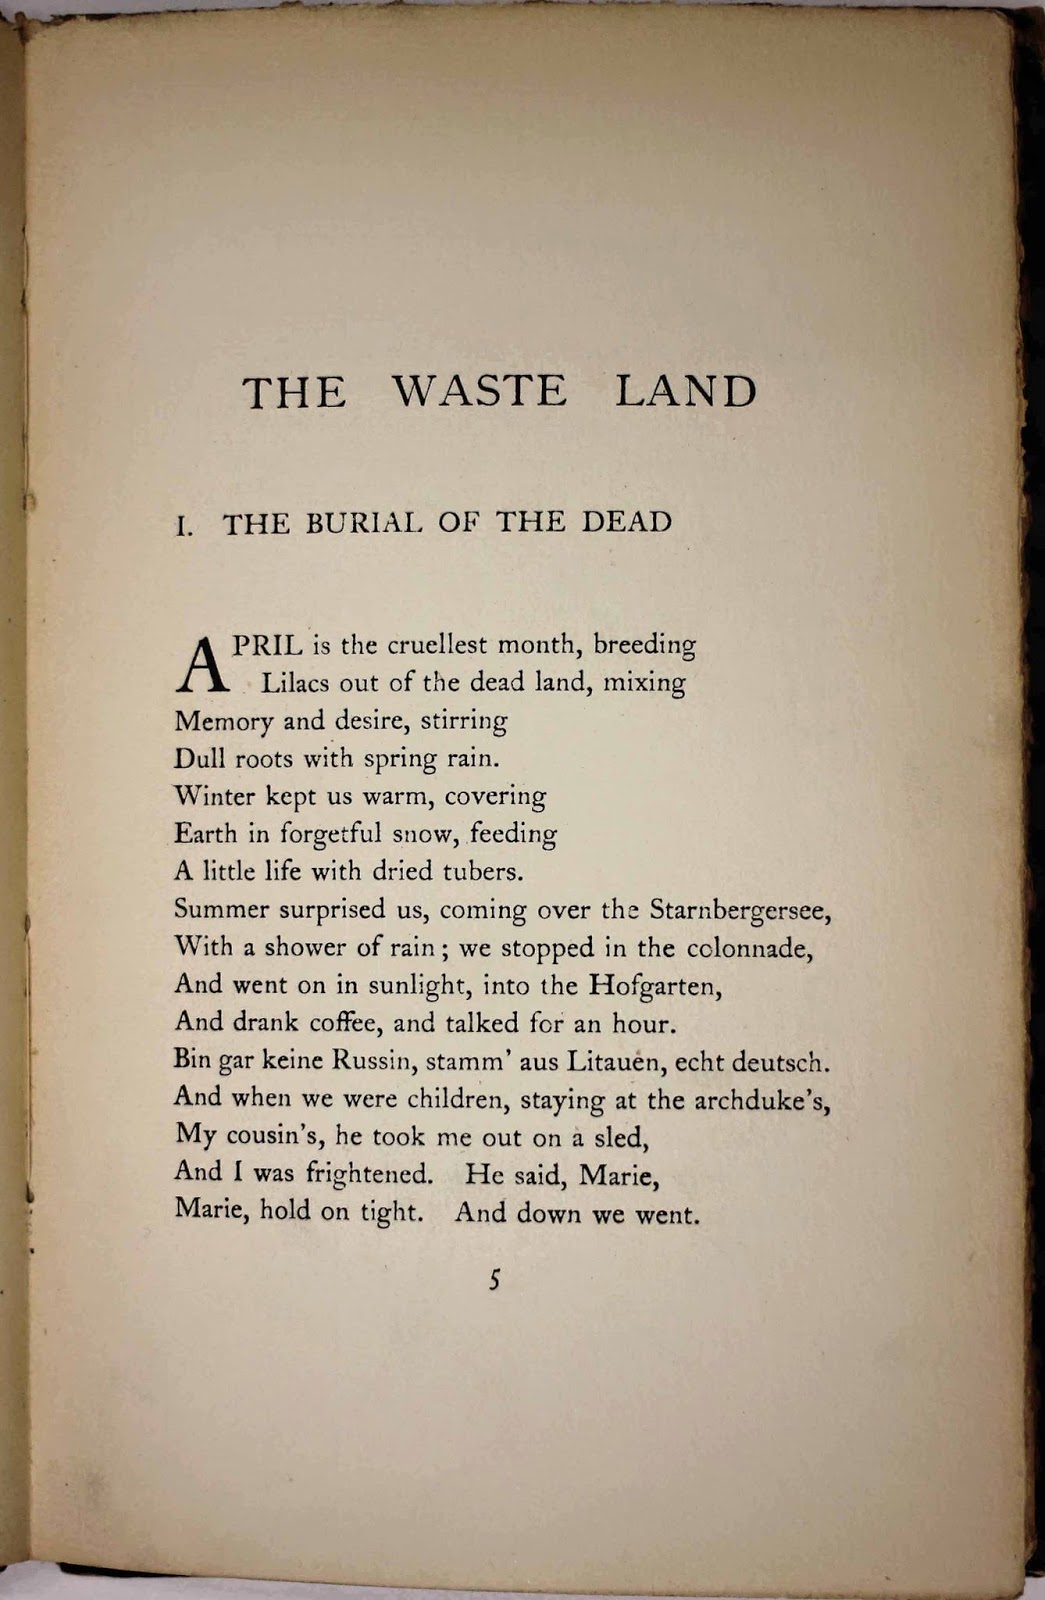 Page from "The Waste Land" by TS Eliot